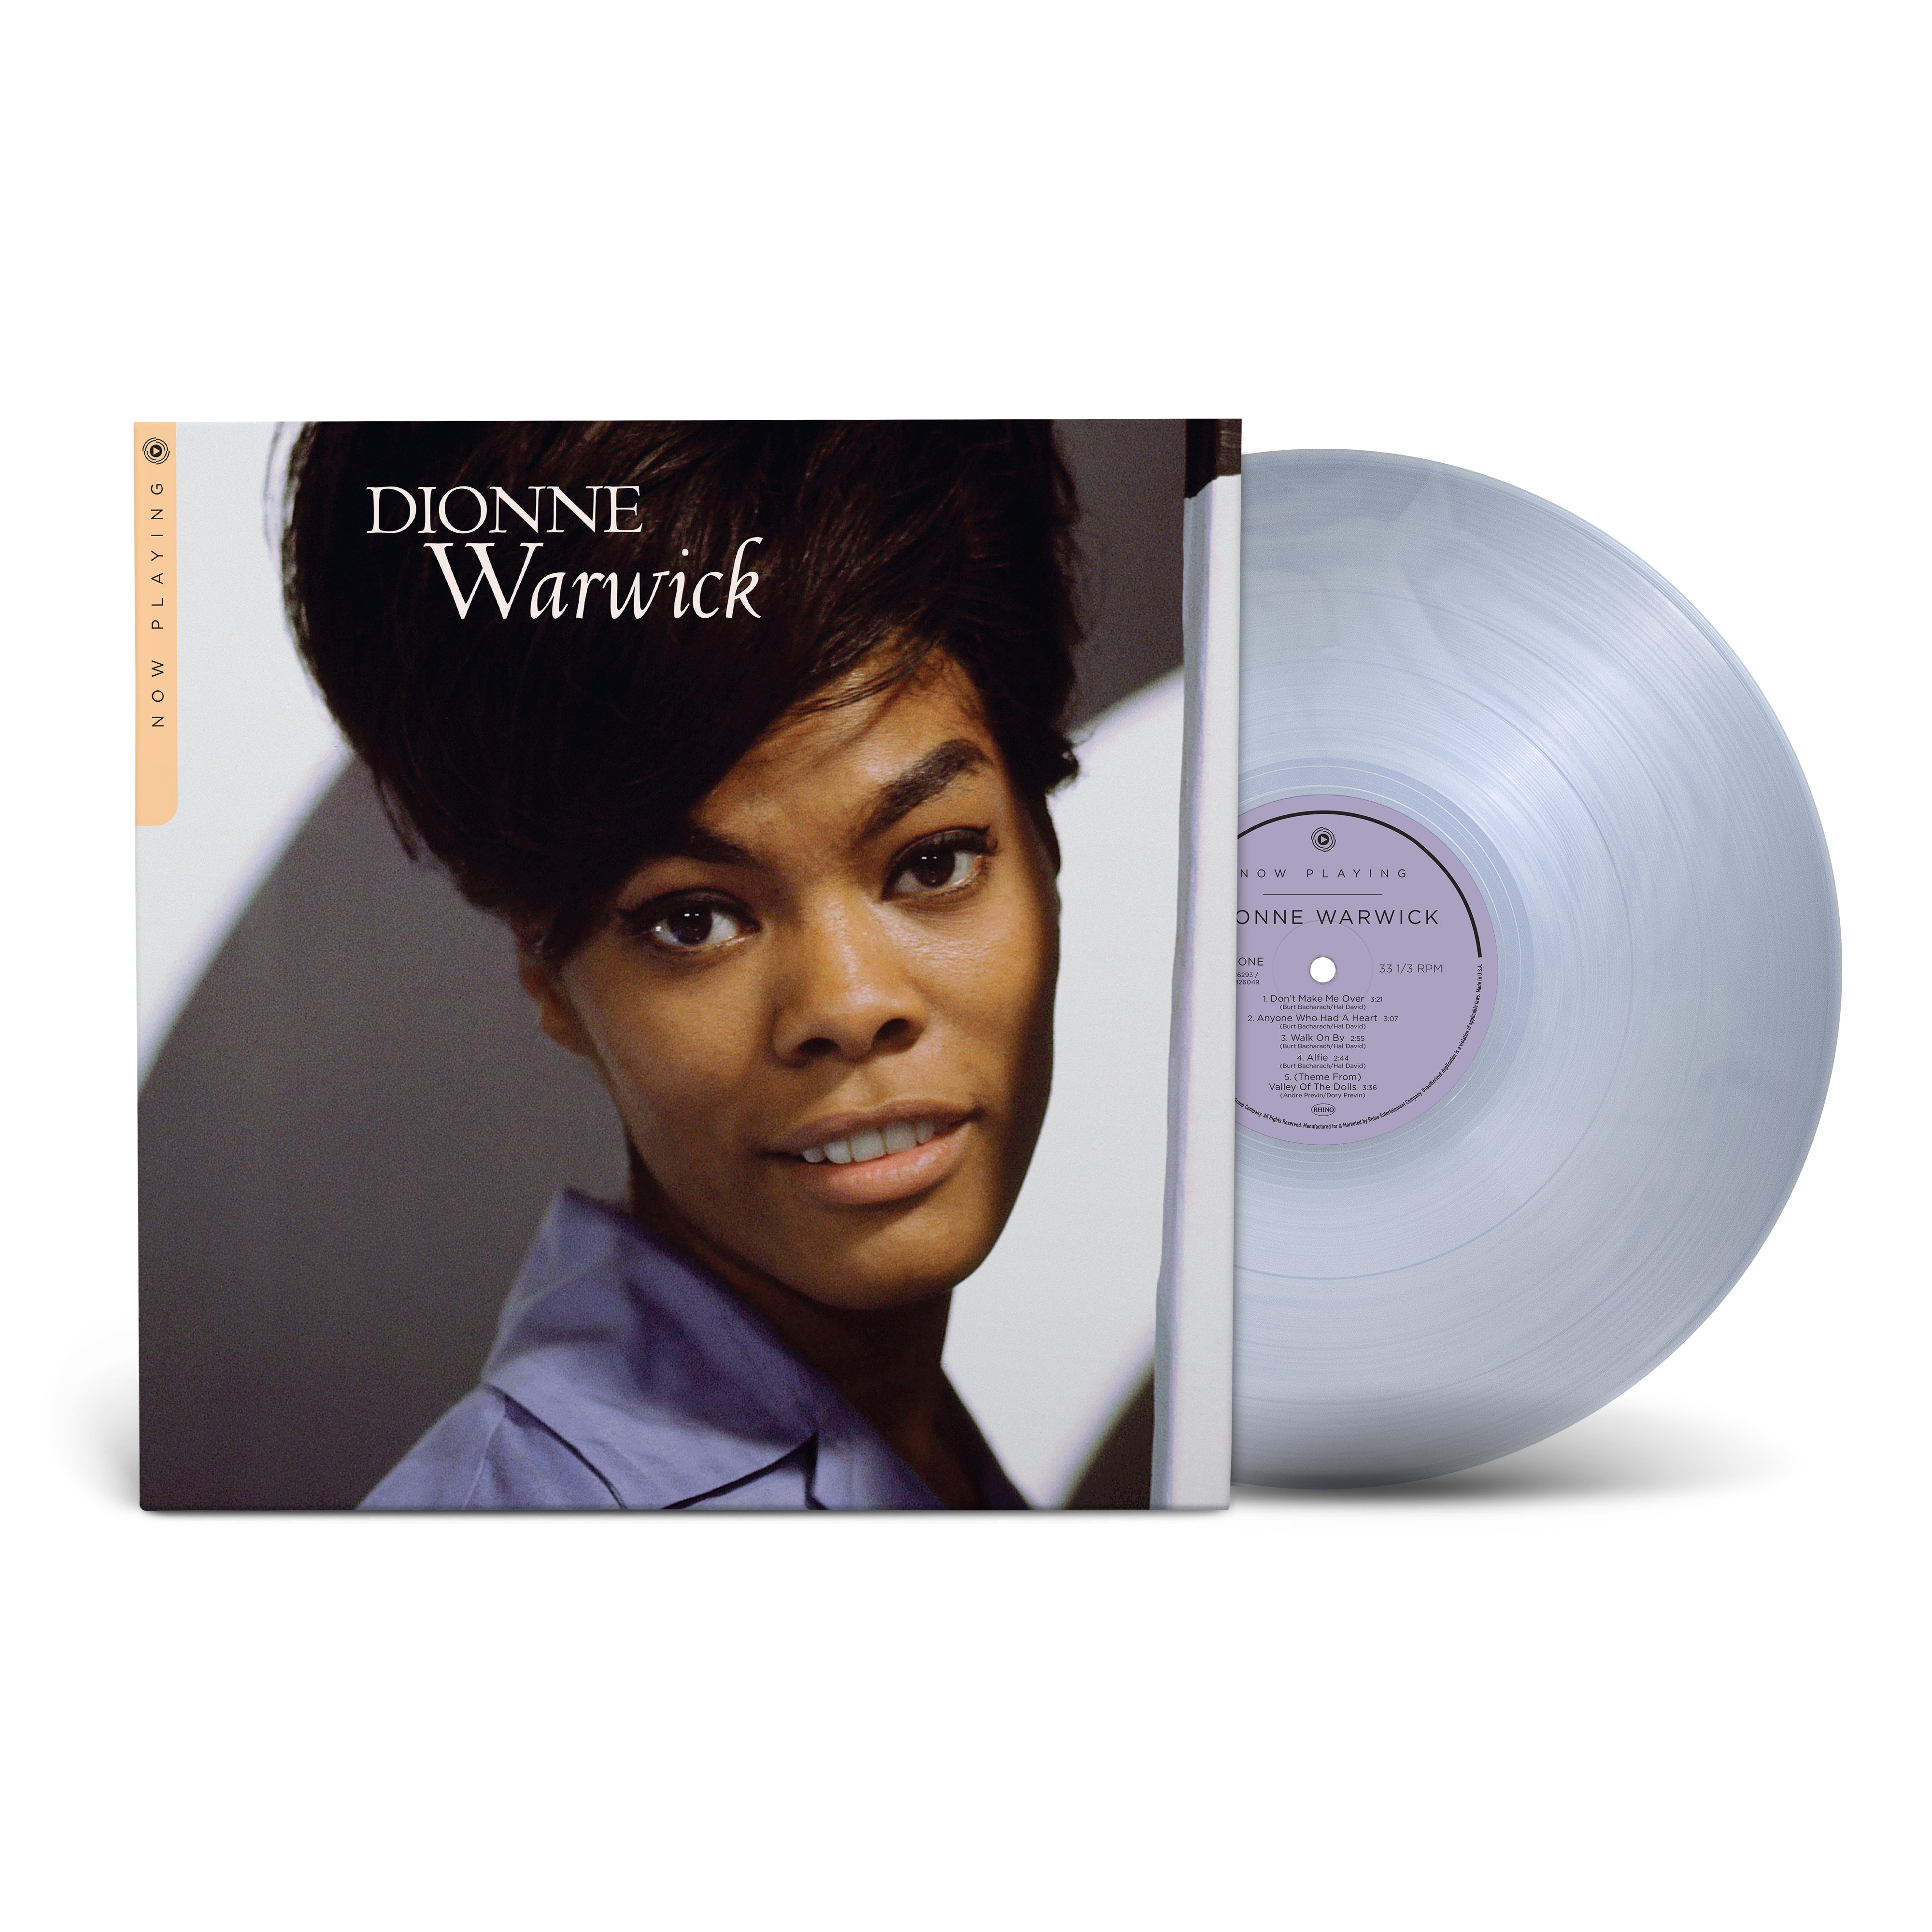 Dionne Warwick - Now Playing: Milky Clear Vinyl LP